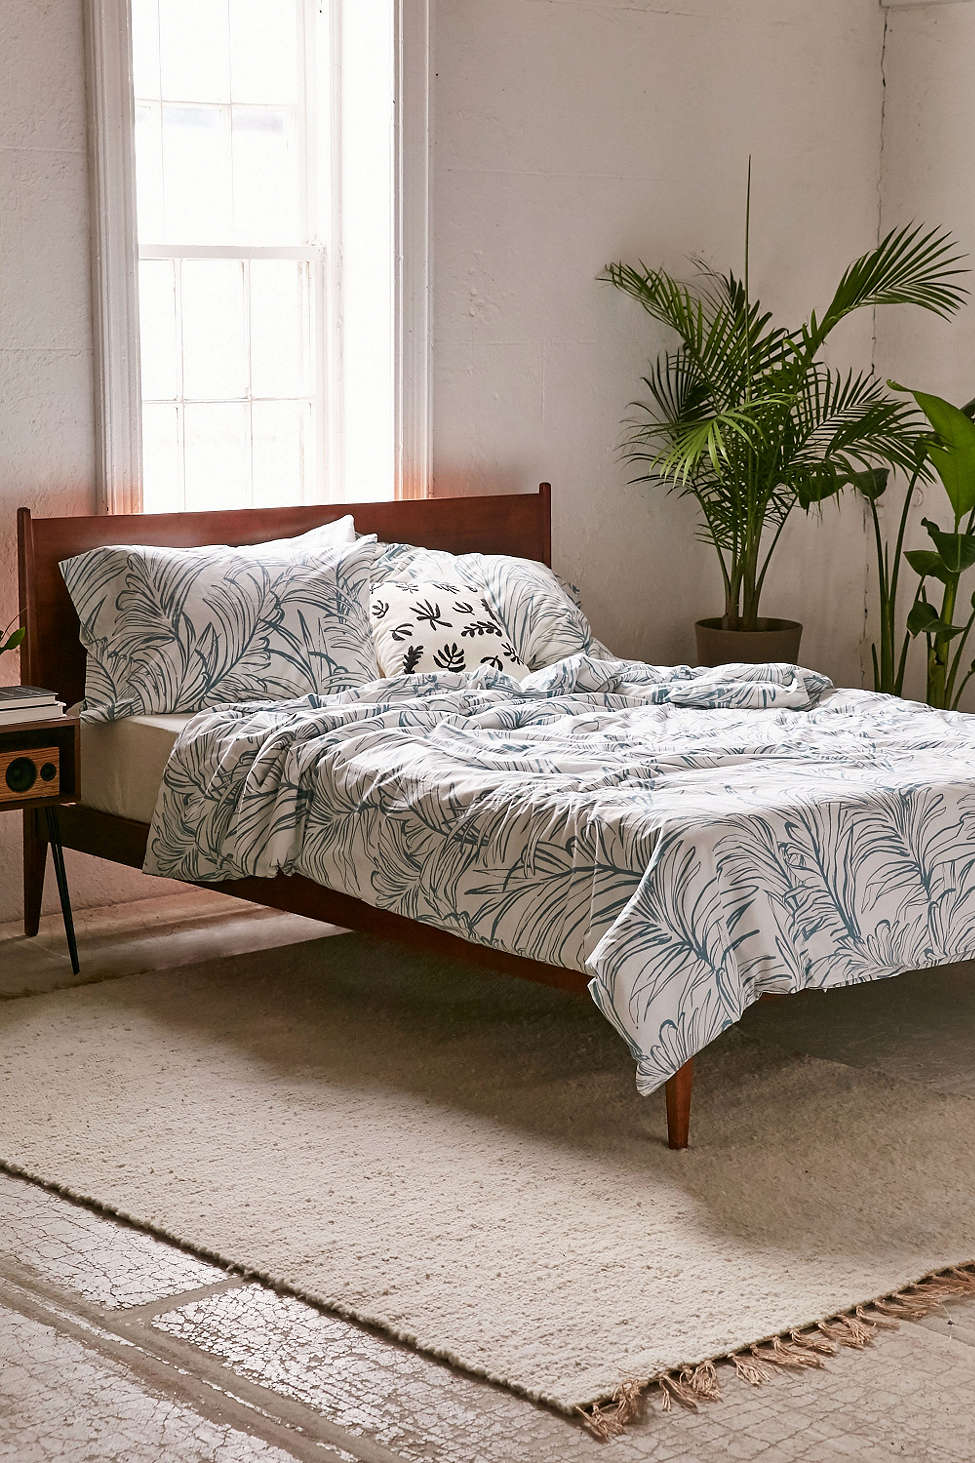 Beachy bedding from Urban Outfitters